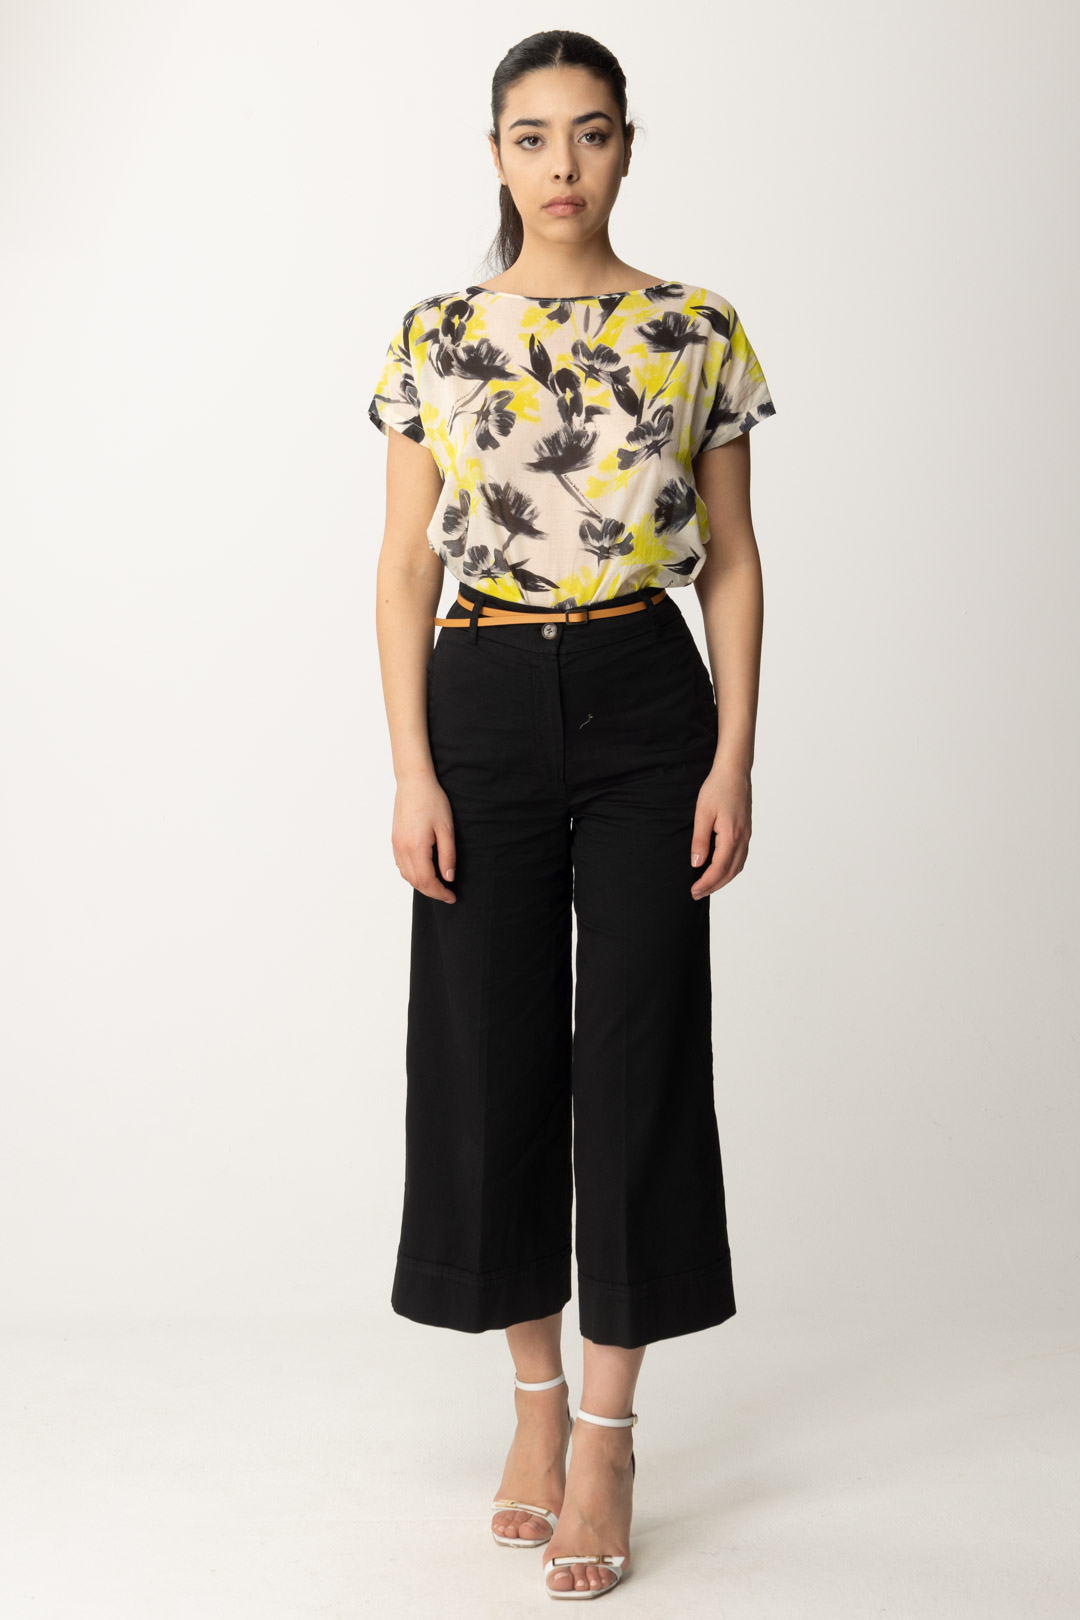 Preview: Alessia Santi Floral patterned blouse BURRO-NEON